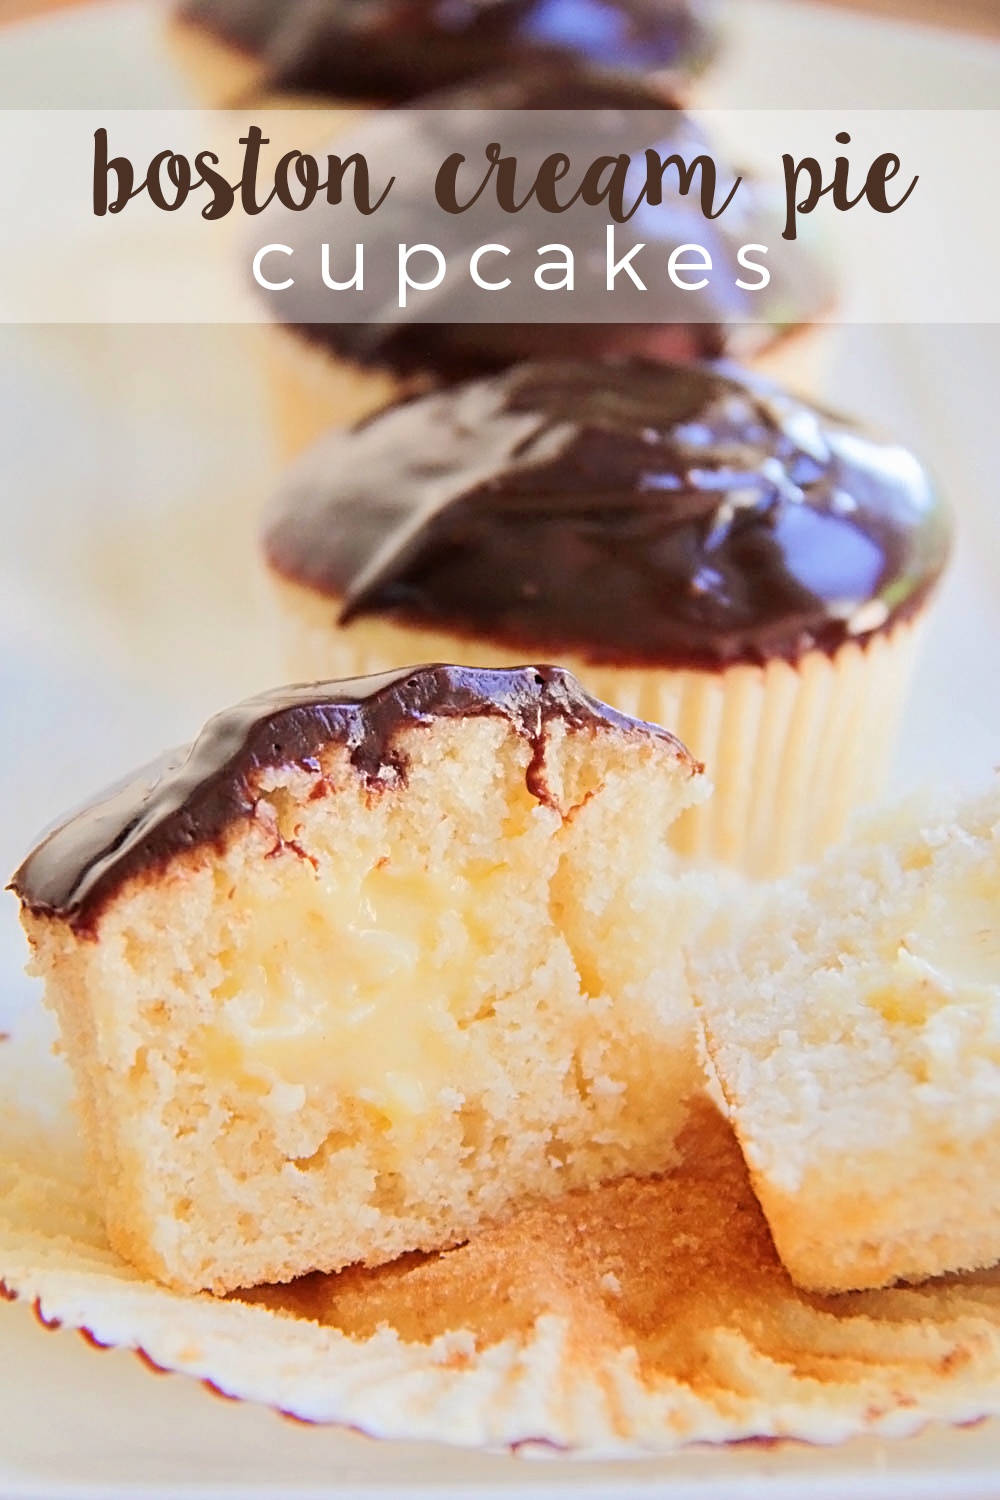 These luscious and delicious Boston cream pie cupcakes are so fun to make, and gorgeous too!